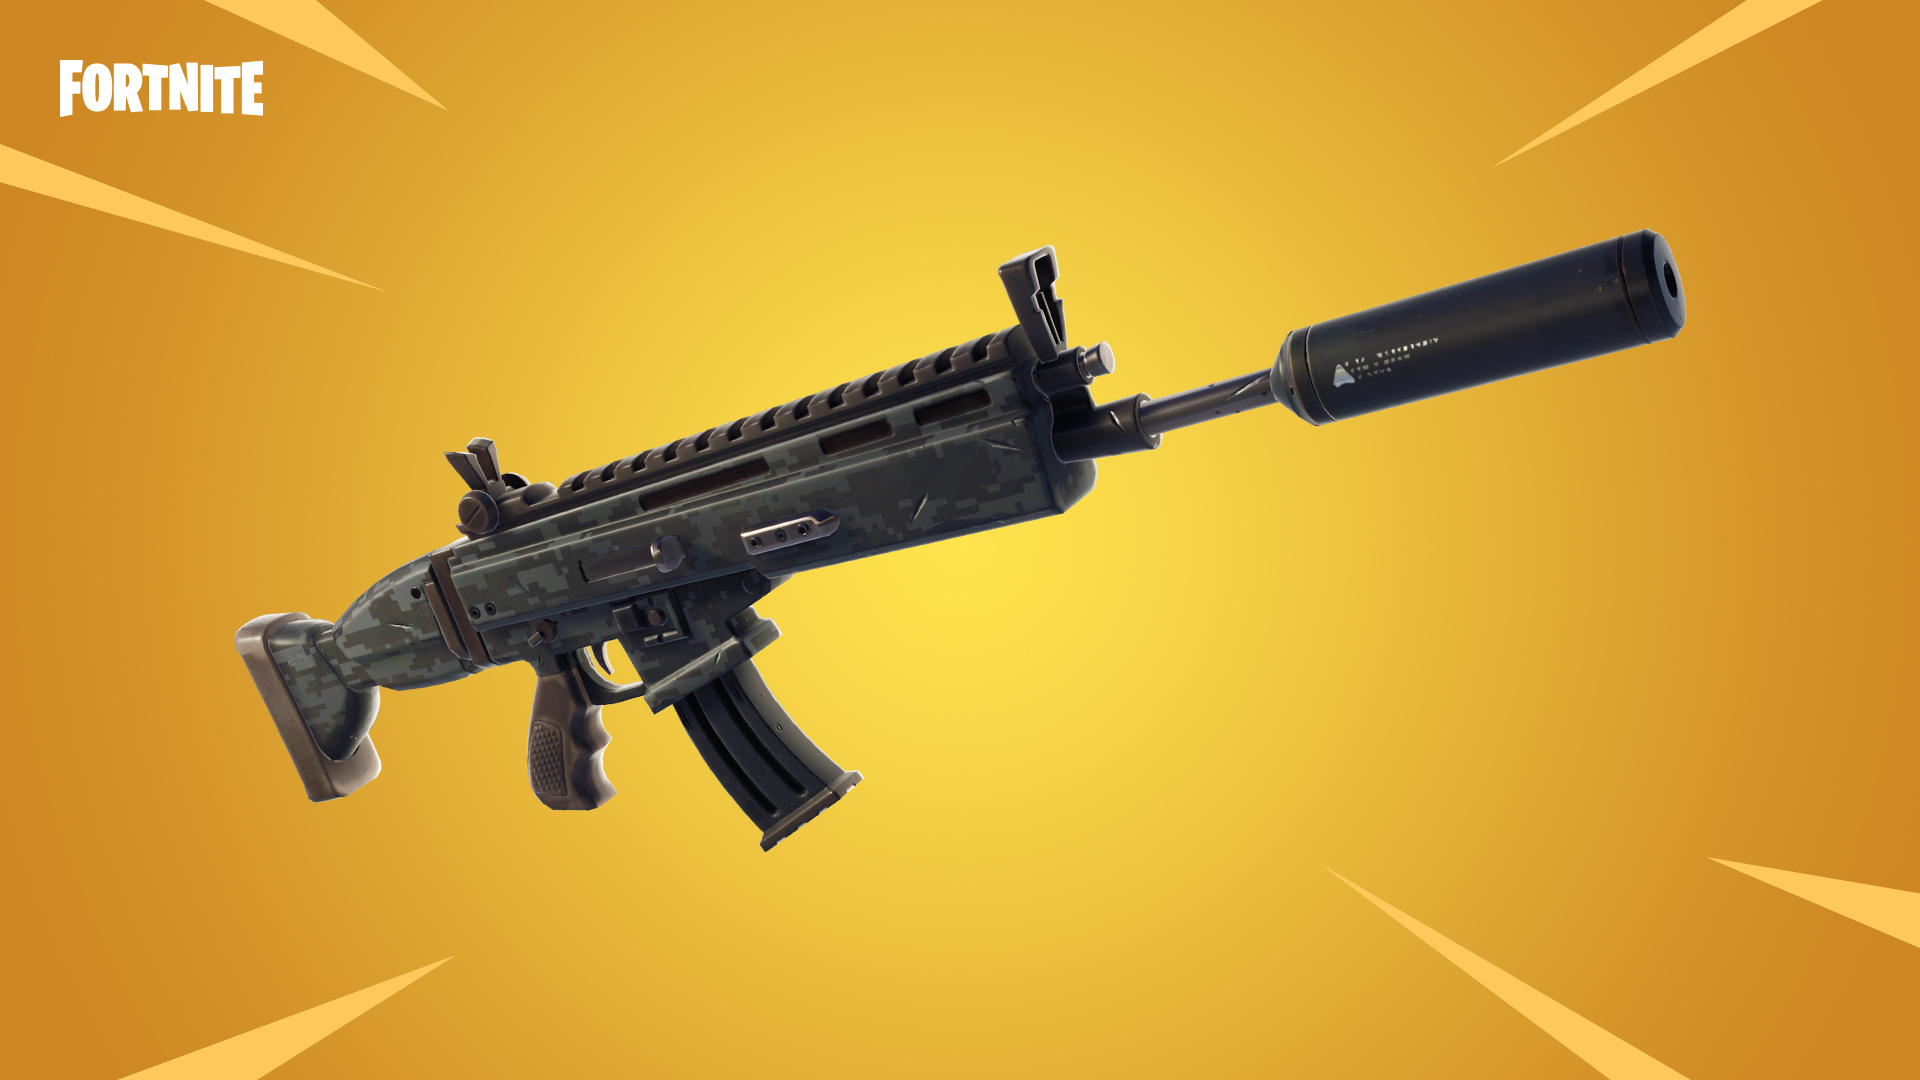 Fortnite Battle Royale 5.40 Content Update Is Out - 1920 x 1080 jpeg 416kB